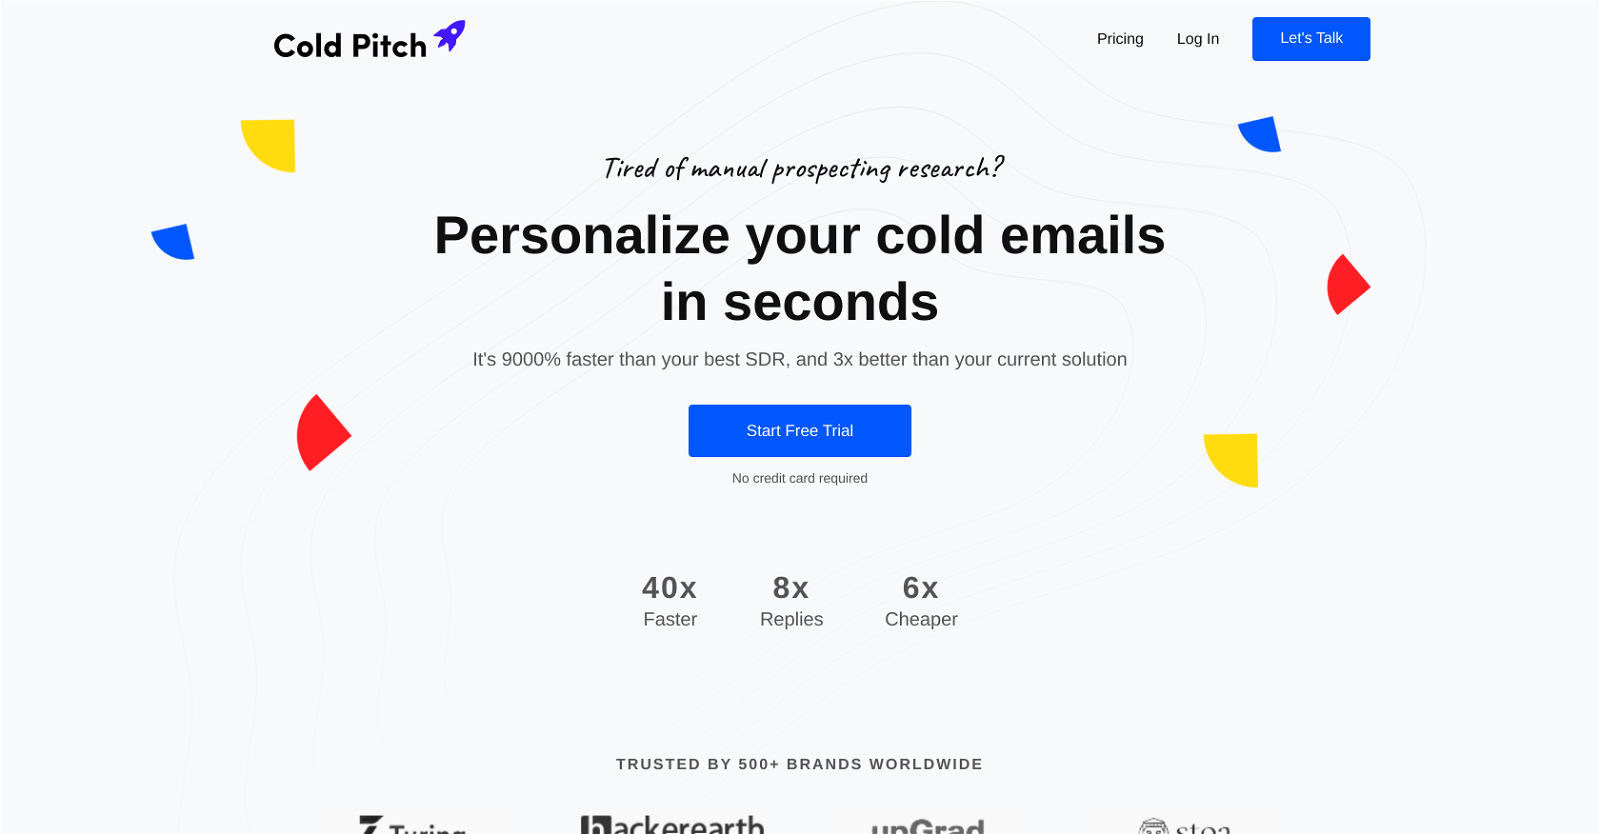 Cold Pitch website